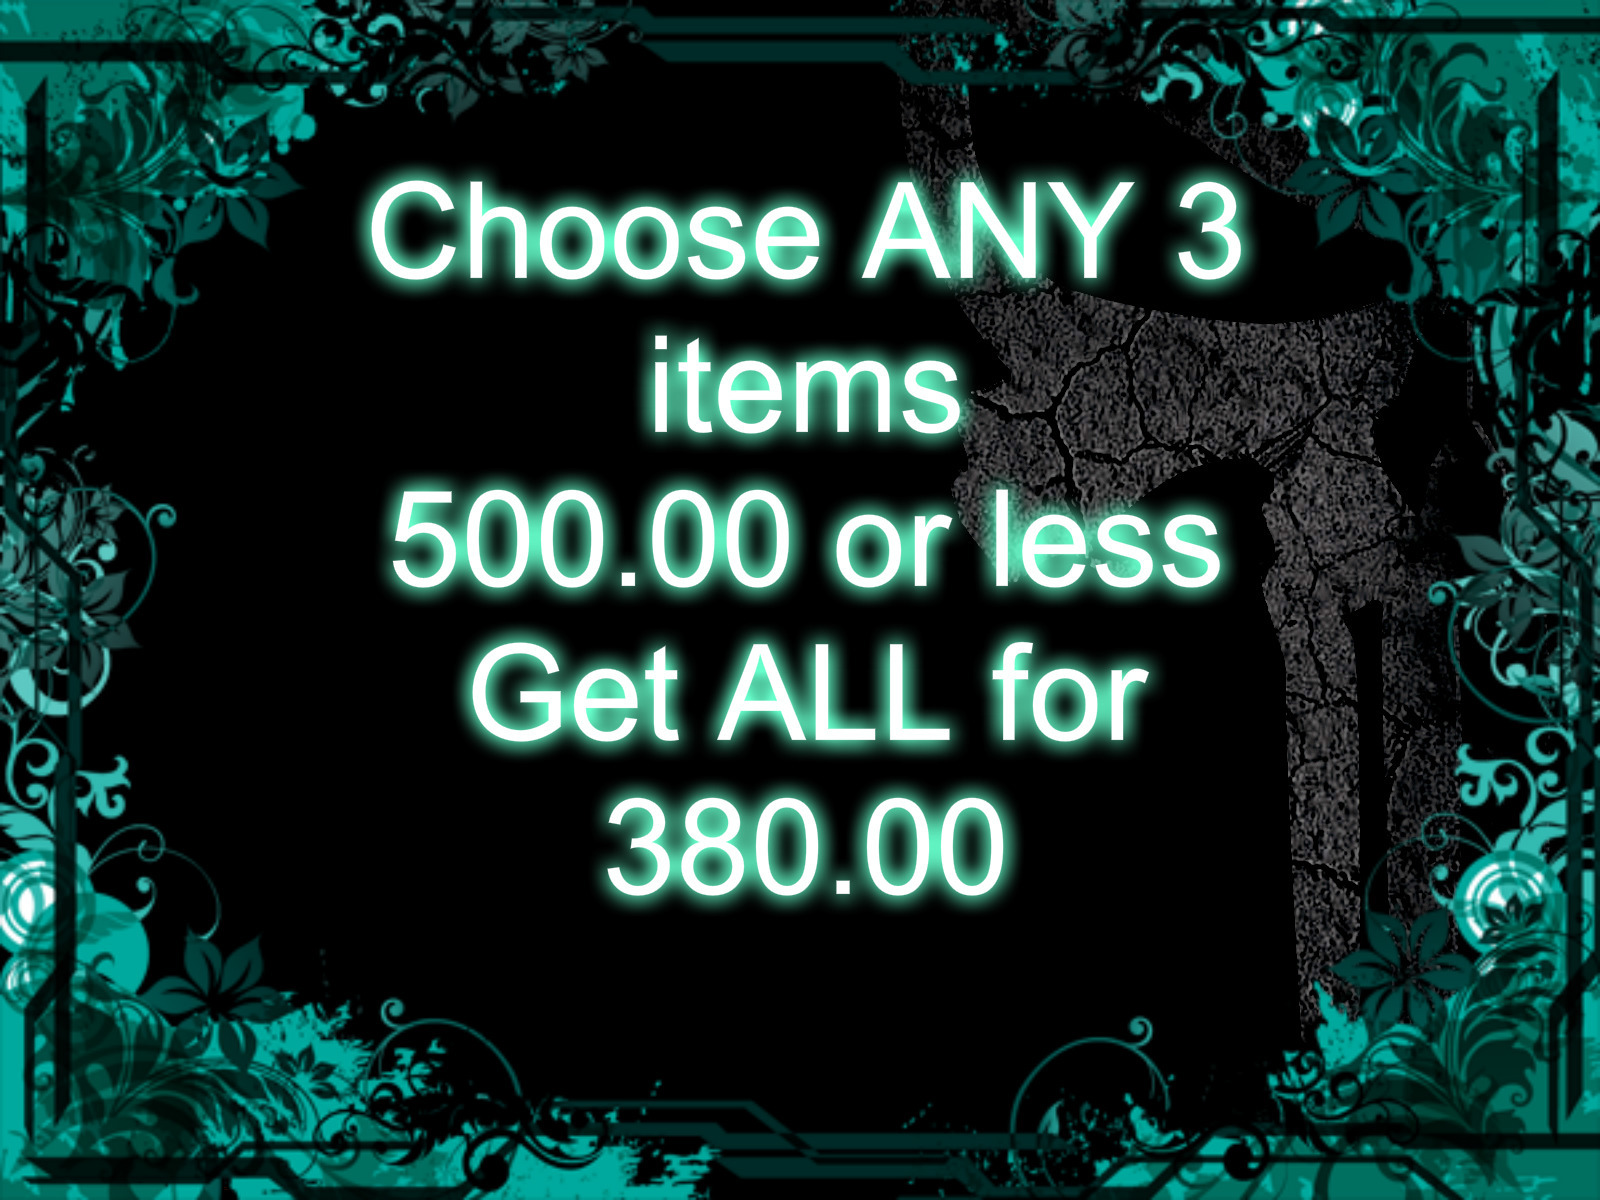 Haunted SALE Choose ANY 3 items 500.00 or less and get ALL for 380.00 + gifts